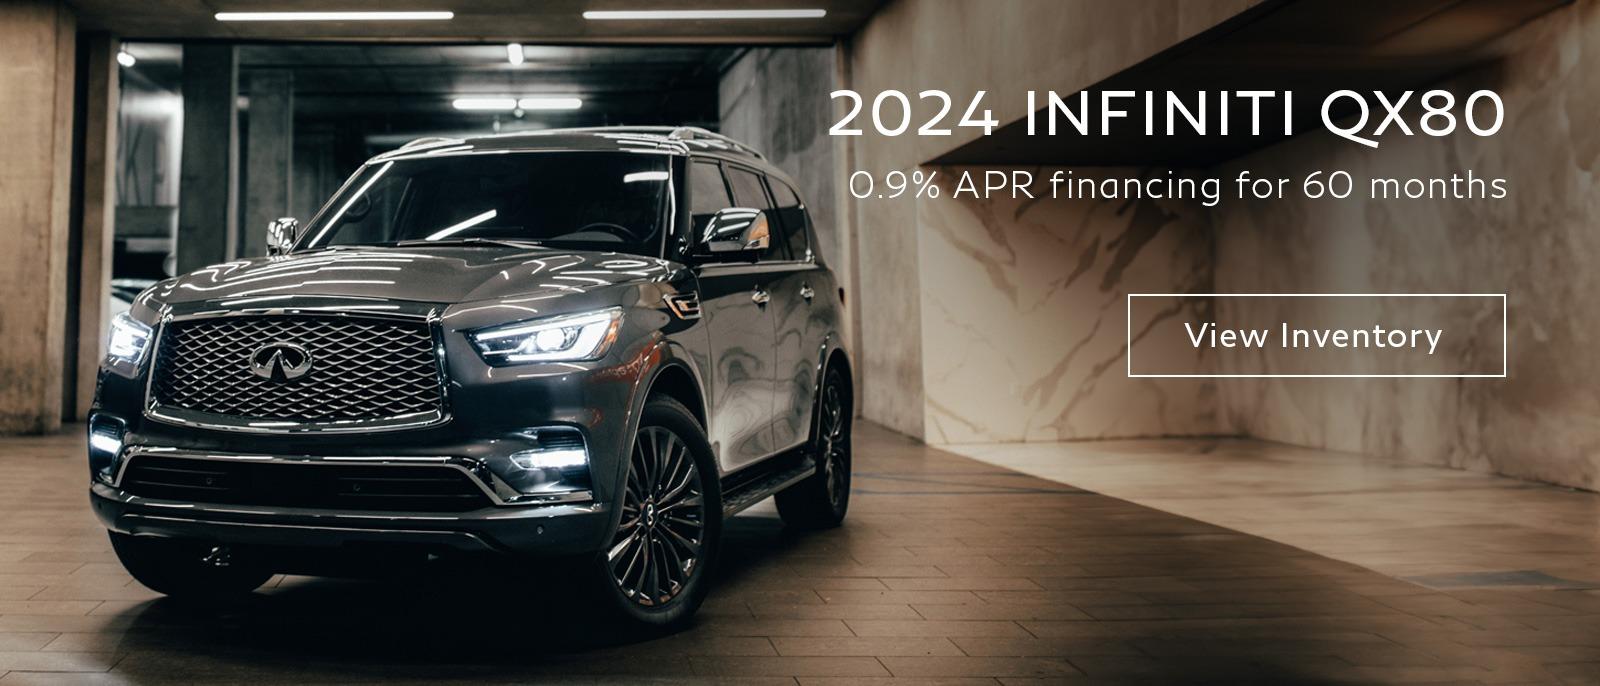 0.9% APR for 60 months on 2024 QX80